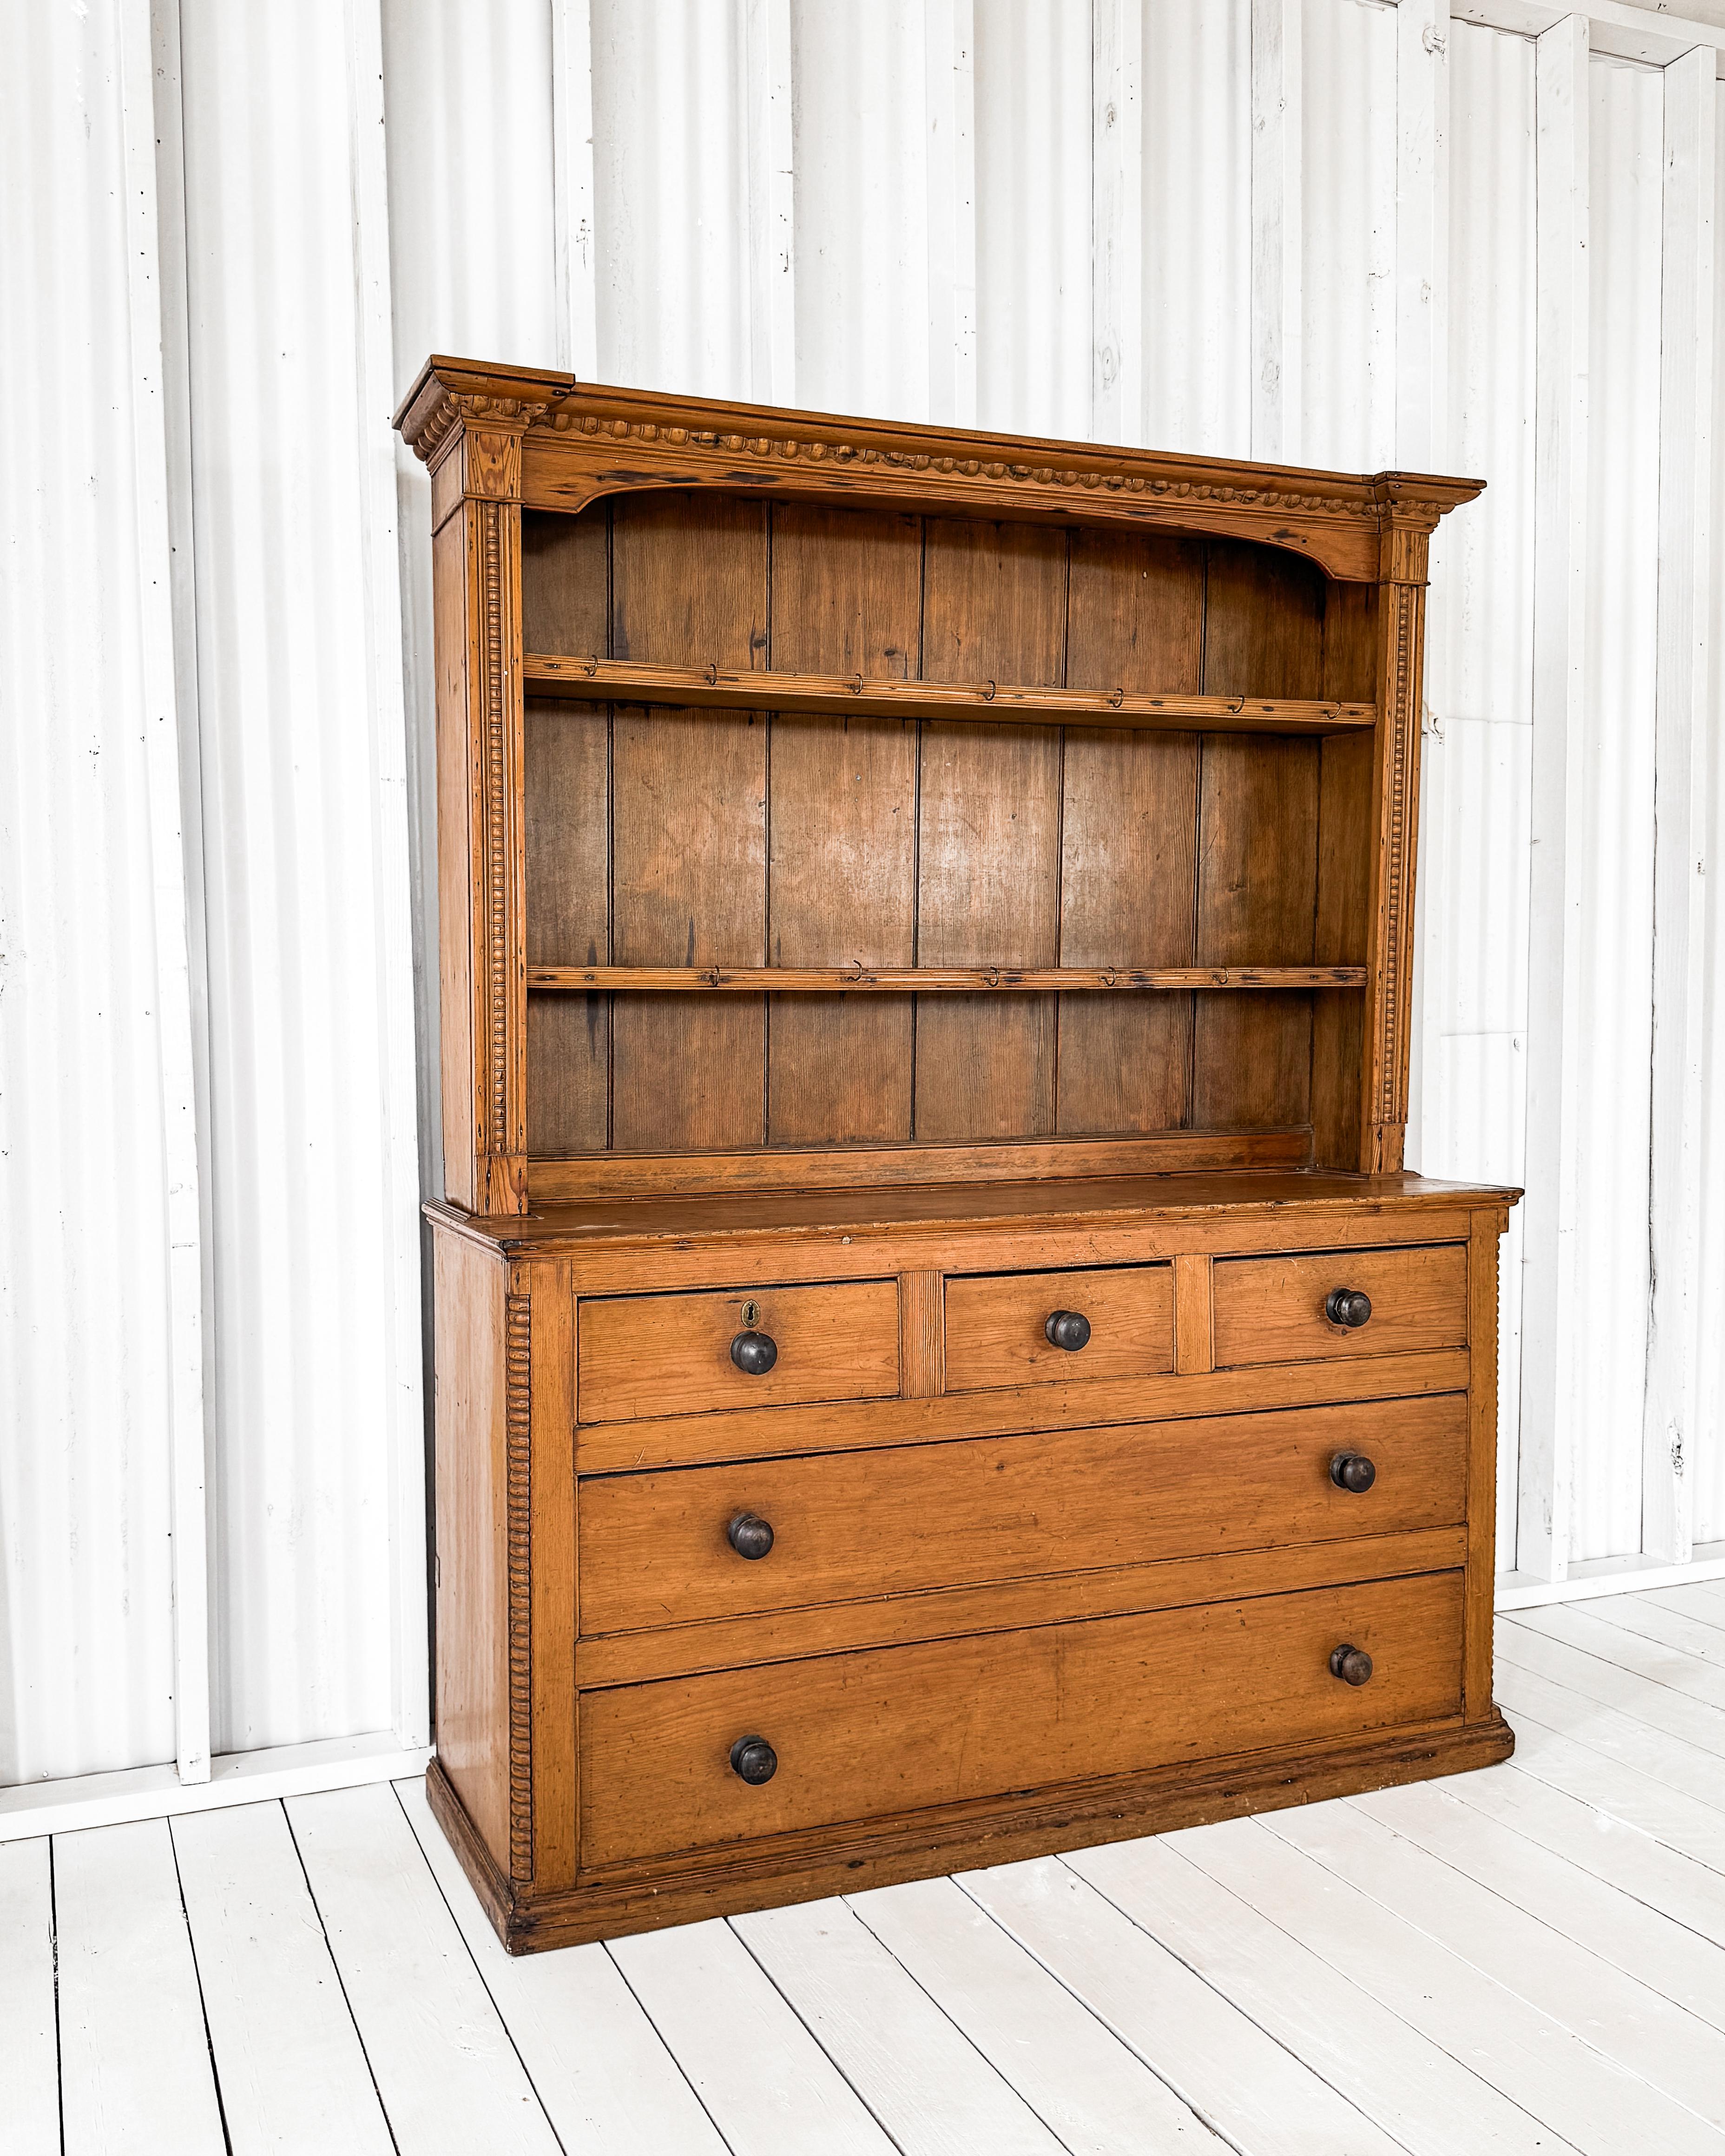 19th Century Pine Dresser with Plate Rack In Good Condition For Sale In Mckinney, TX